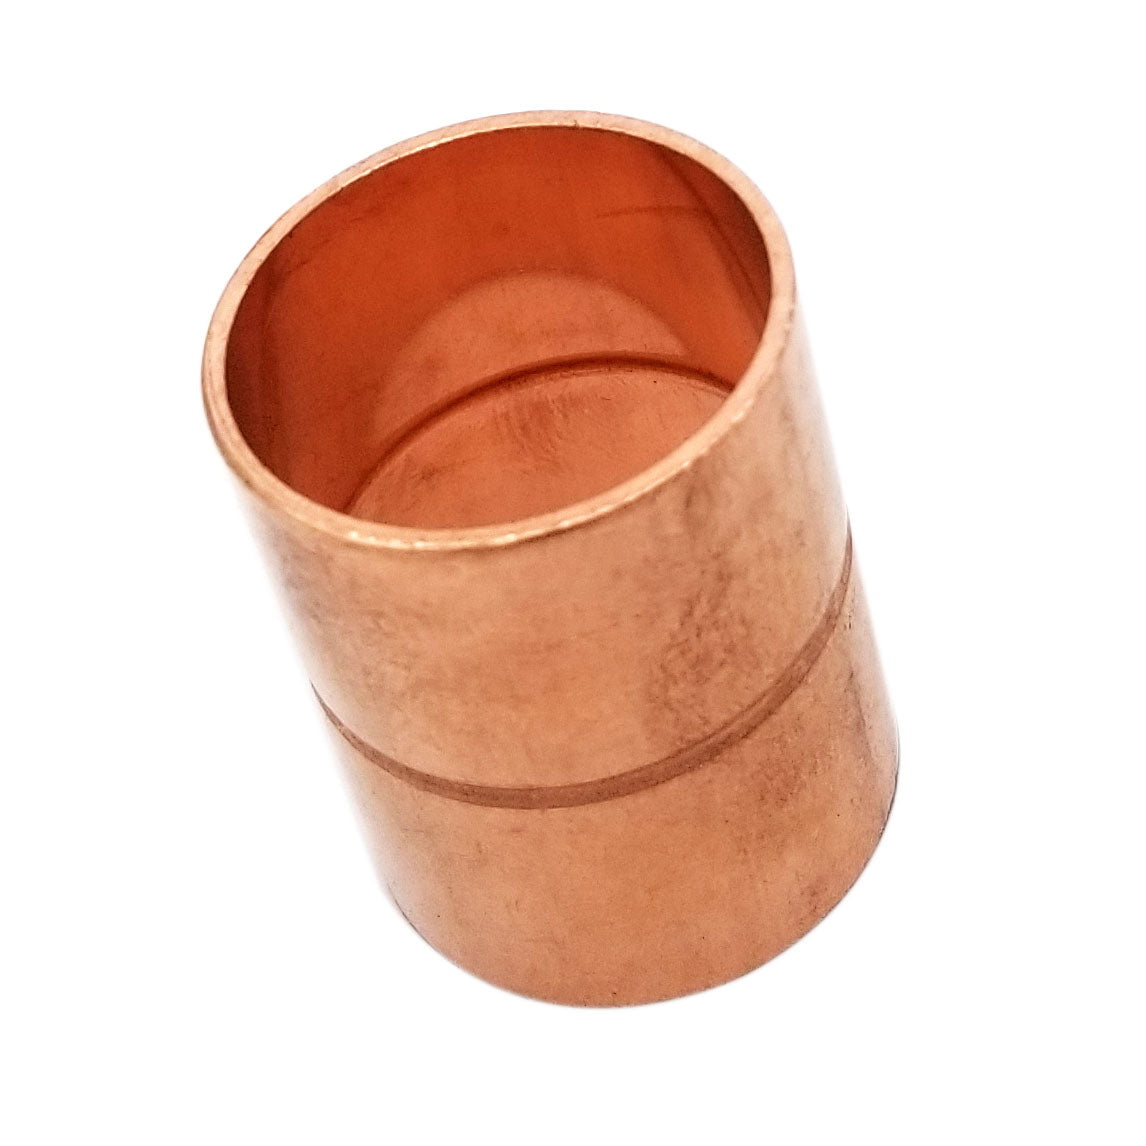 Straight Copper Coupling Fittings With Rolled Tube Stop